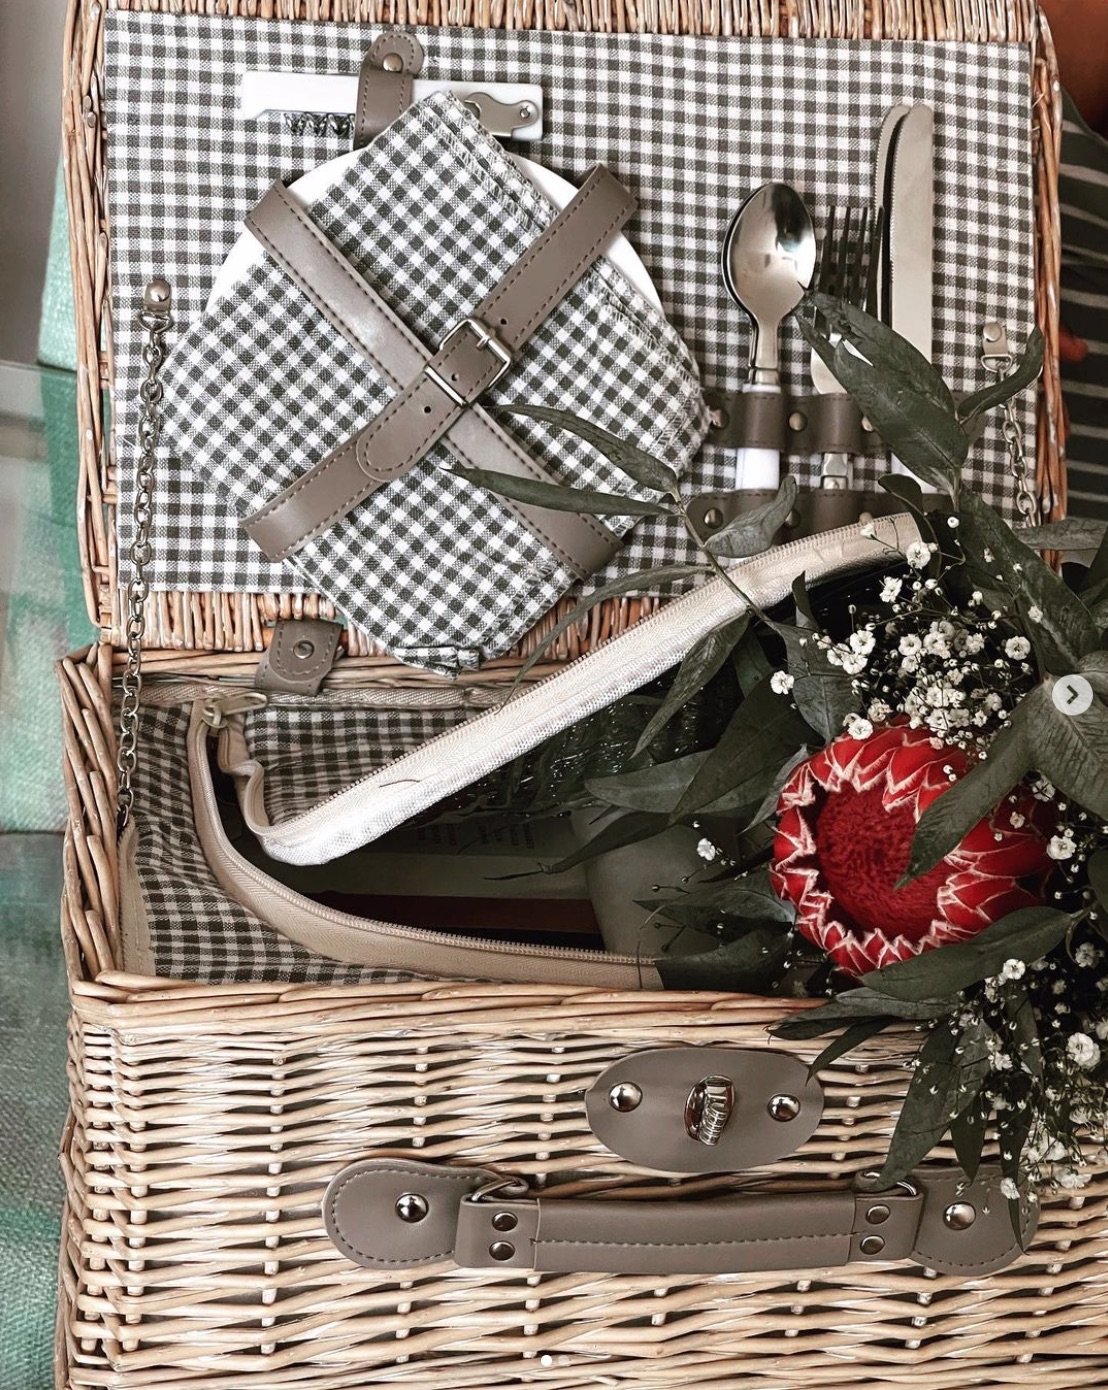 Picnic basket with flowers.jpg